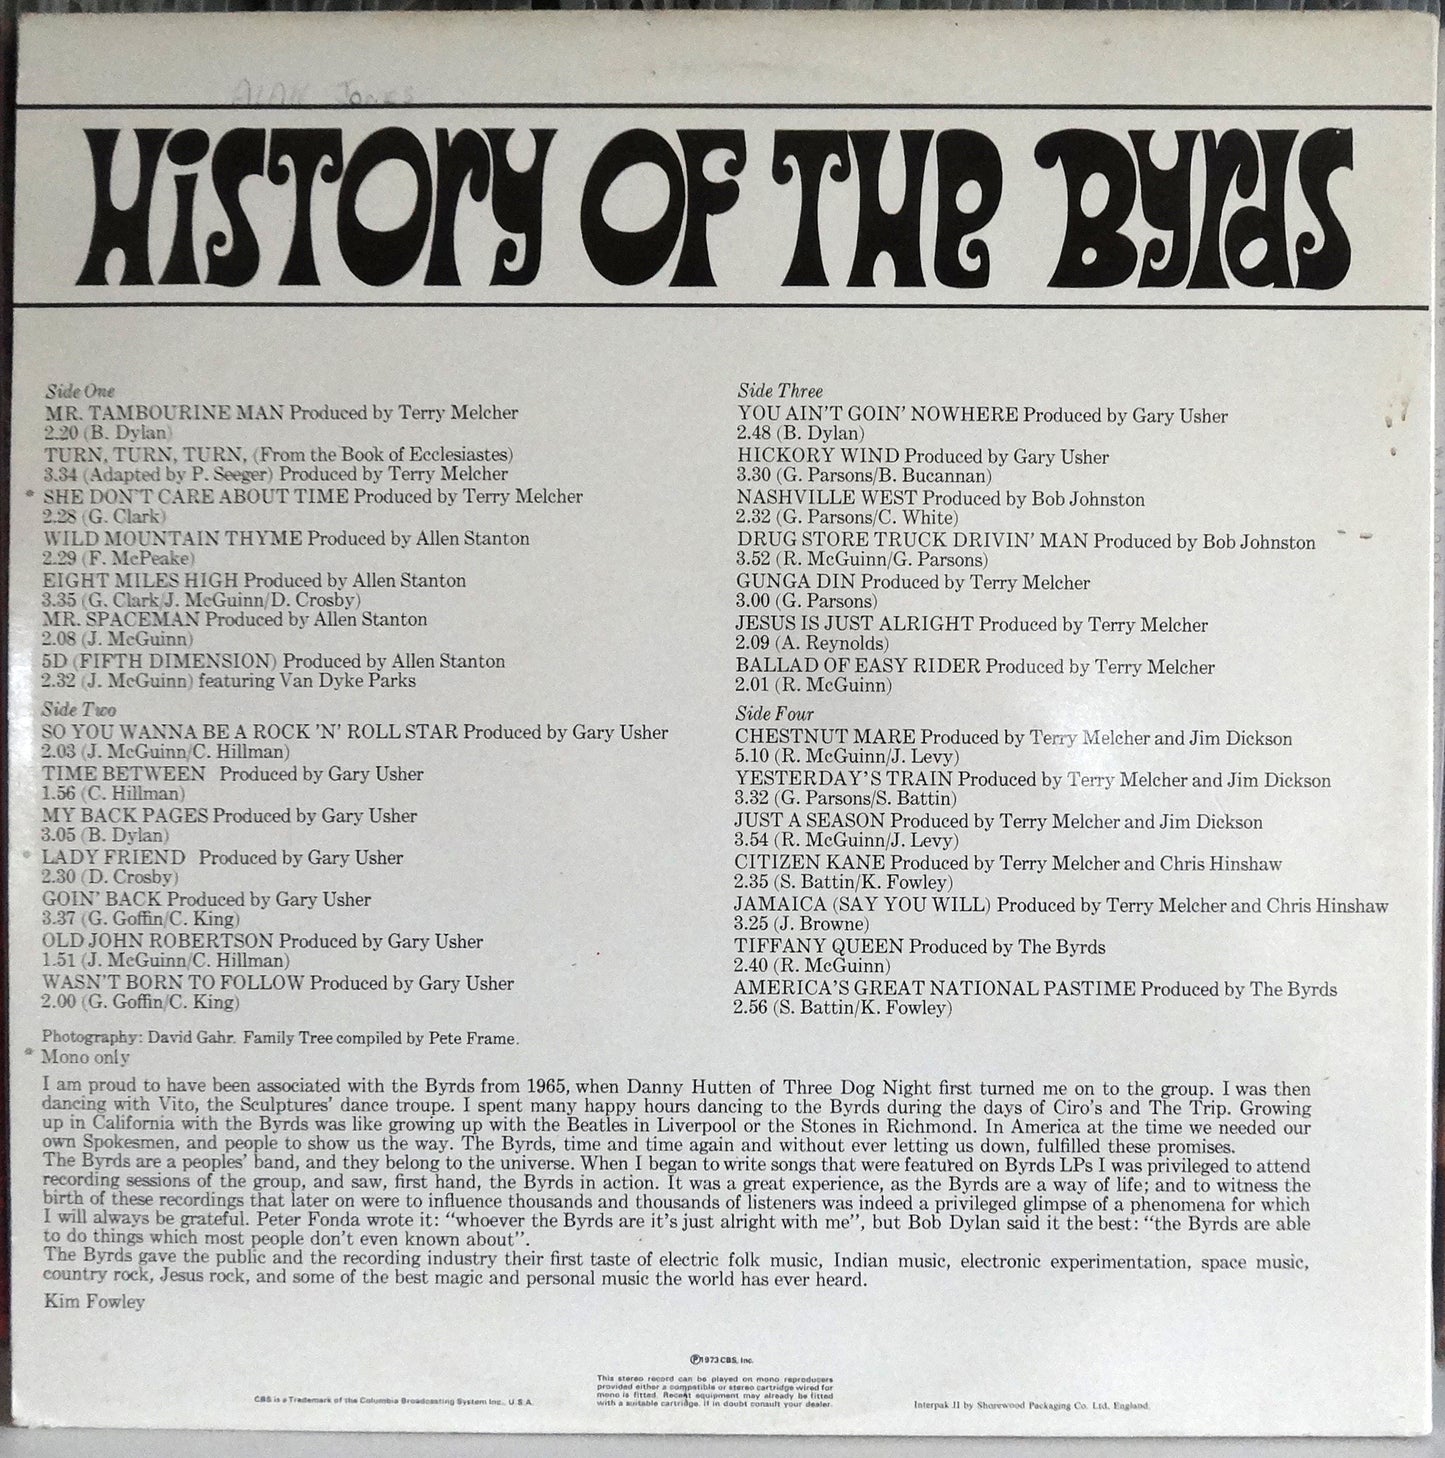 The Byrds - History Of The Birds, UK 1973, VG+/VG+